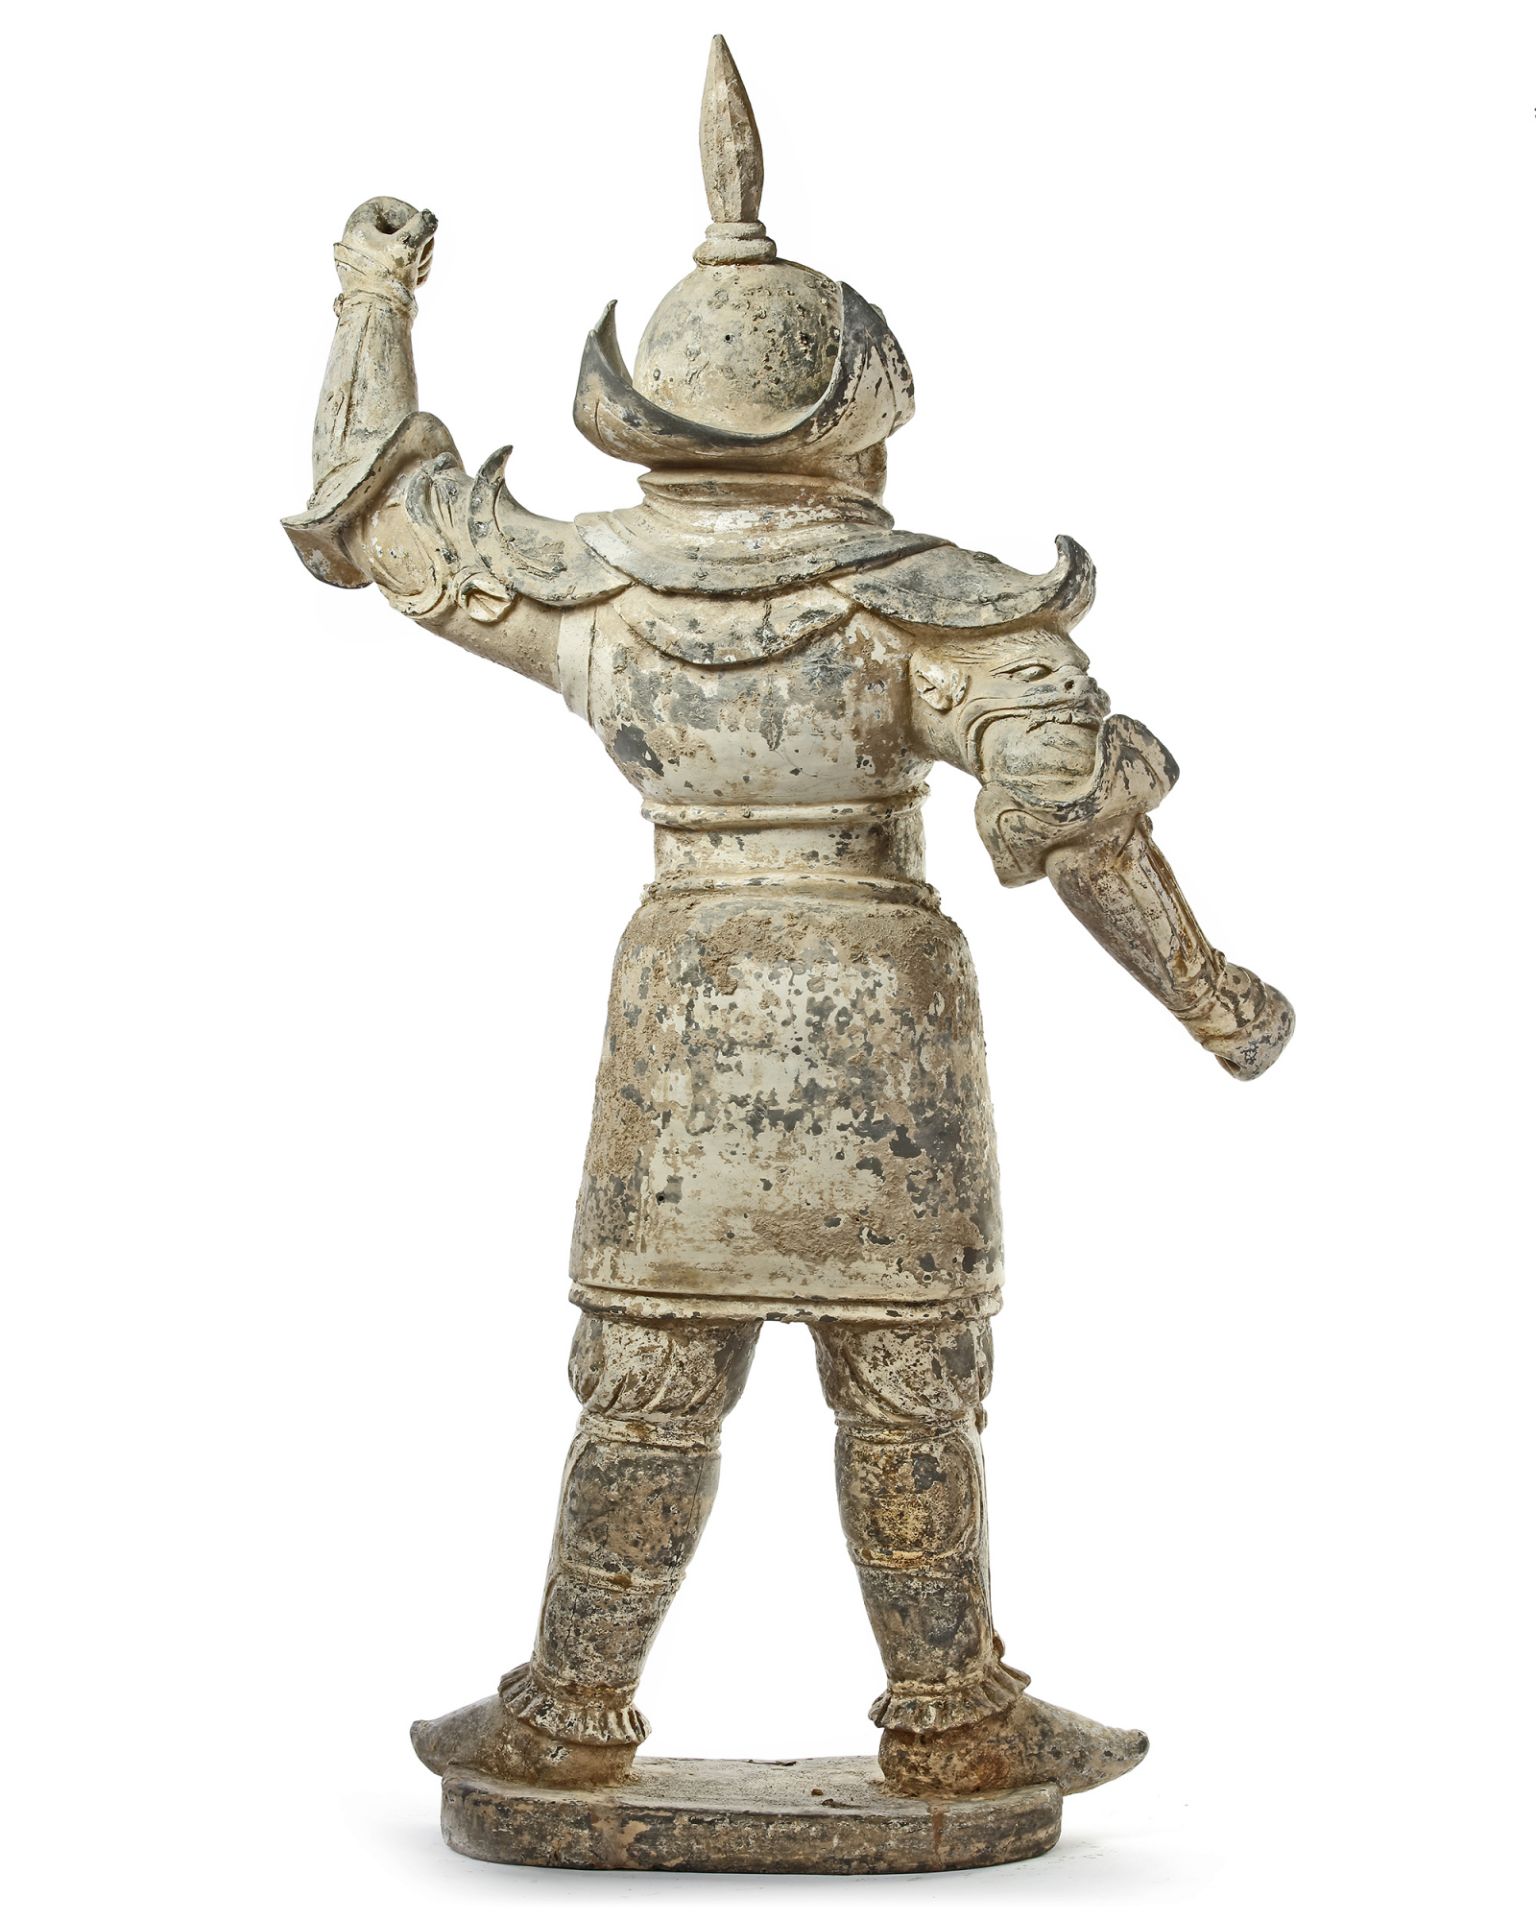 A LARGE CHINESE POTTERY GUARDIAN KING, EARLY TANG DYNASTY, MID 7TH CENTURY - Image 4 of 6